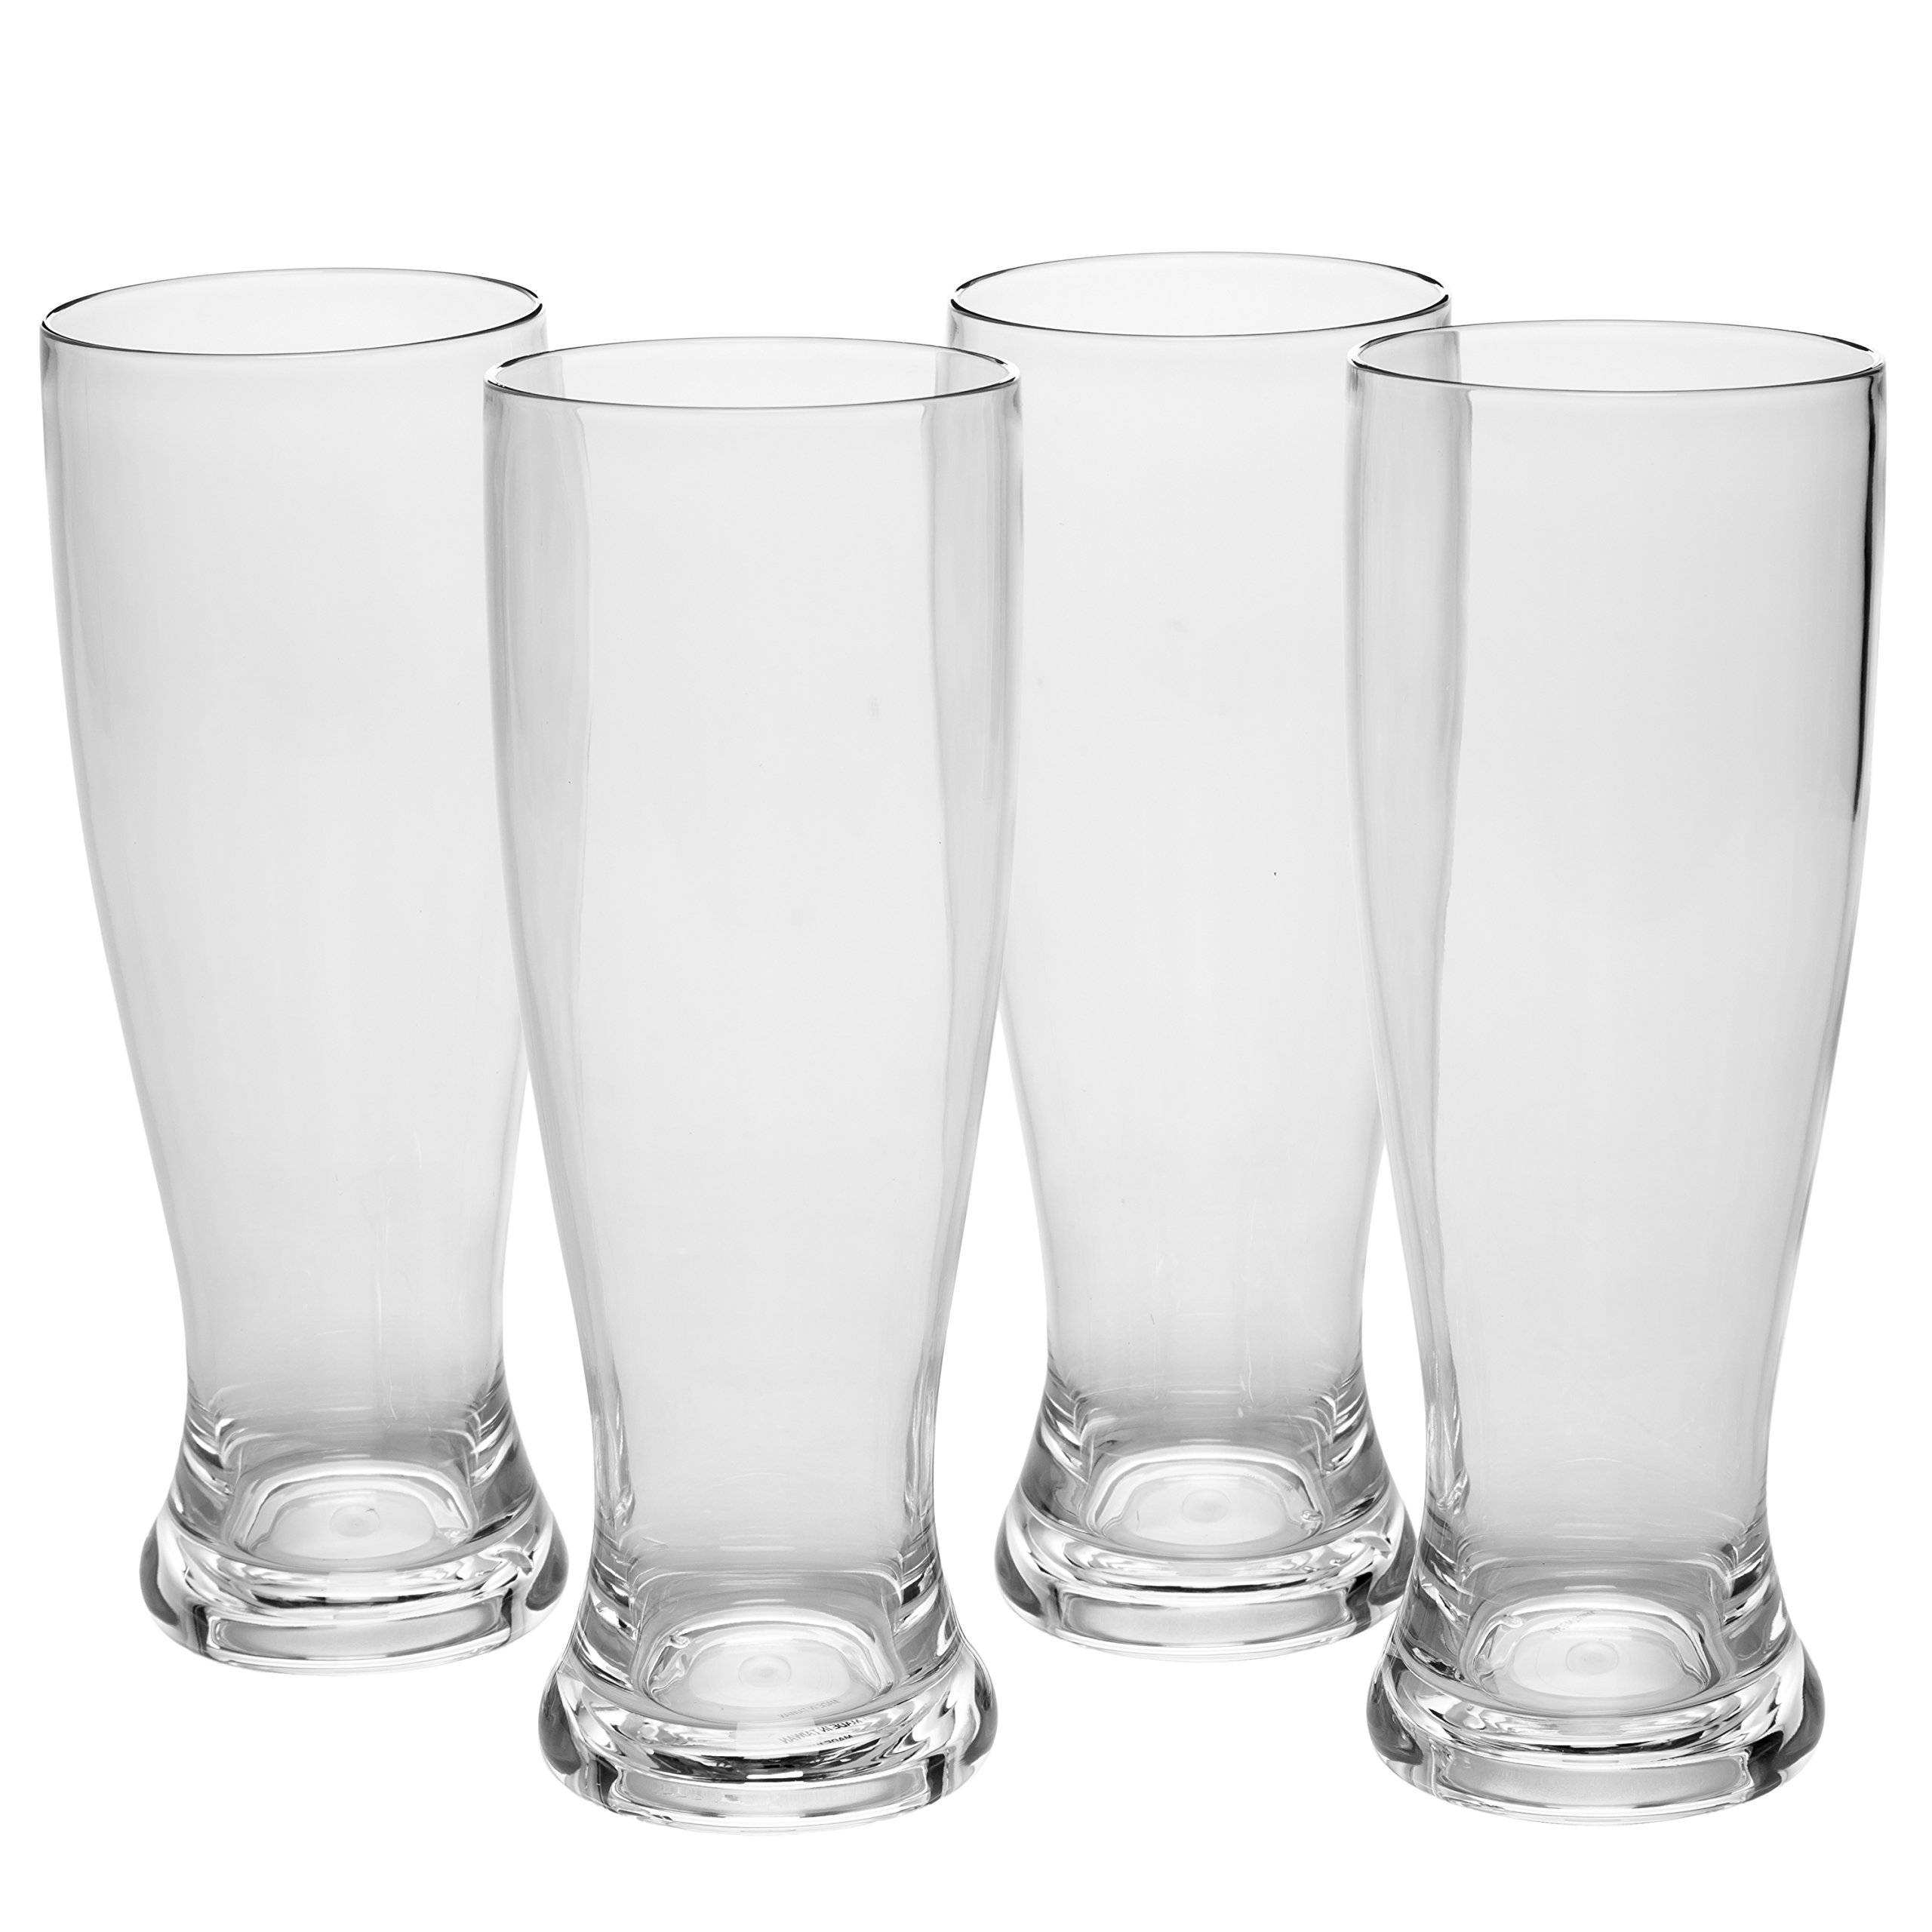 D'Eco Unbreakable 24 oz Pilsner Beer Glasses (Set of 4) - Reusable Shatterproof Classic Pub Beer & Cocktail Glasses - Perfect Indoor Outdoor Drinking Cups for Parties - Large Beer Pint Glasses Set